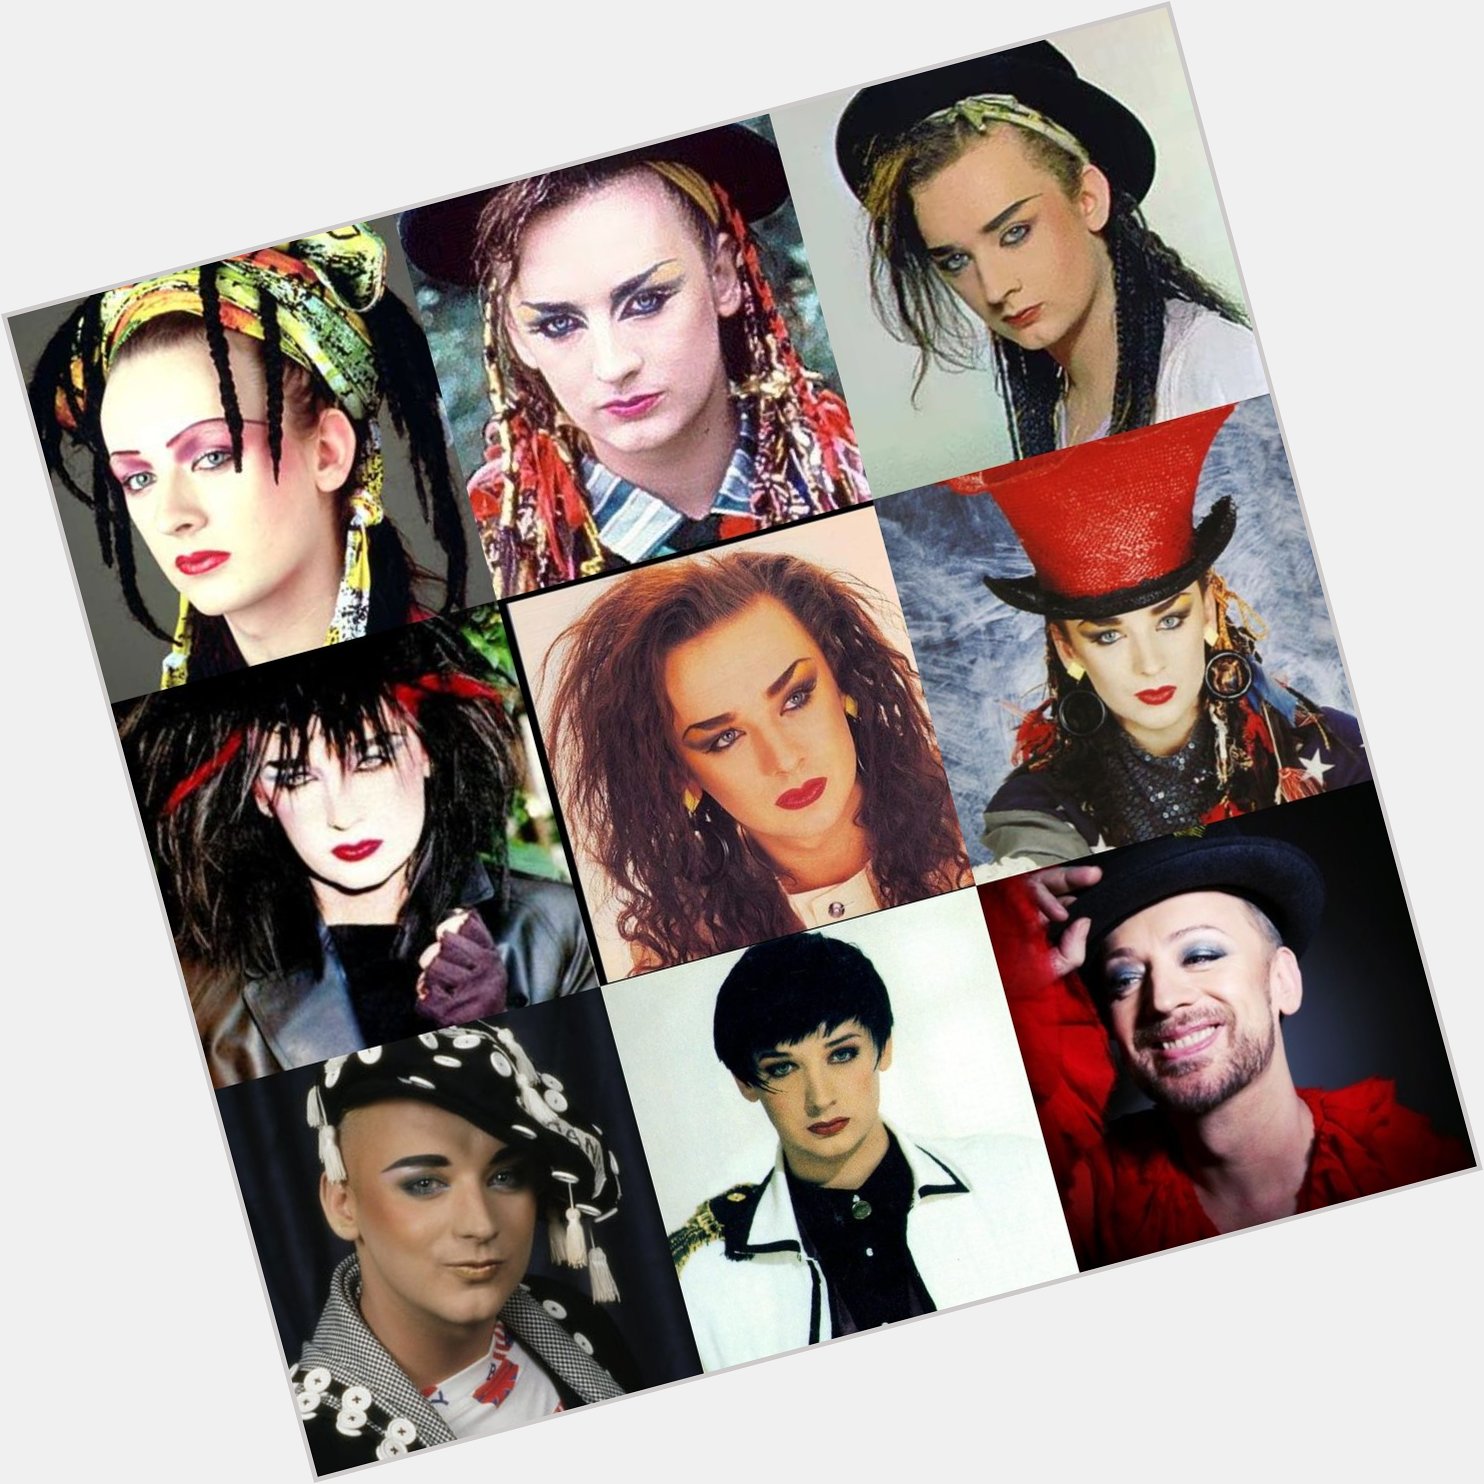 Happy Birthday Boy George
What are your favourite 
Culture Club & solo tracks? 